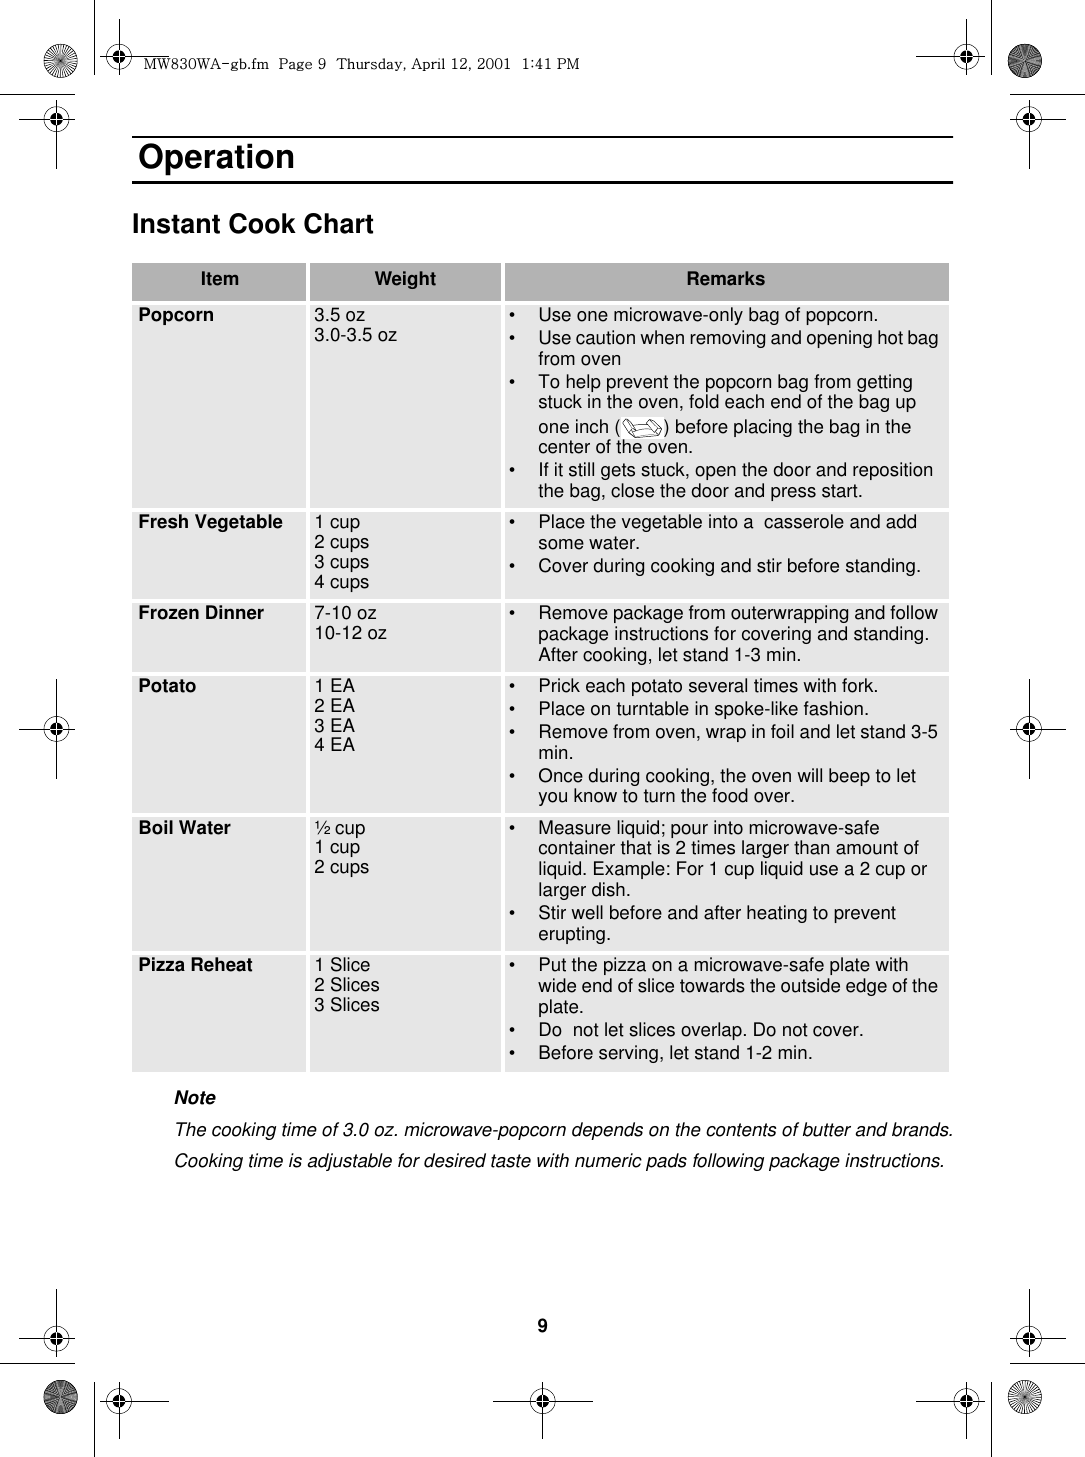 9 OperationInstant Cook ChartNoteThe cooking time of 3.0 oz. microwave-popcorn depends on the contents of butter and brands.Cooking time is adjustable for desired taste with numeric pads following package instructions.Item Weight RemarksPopcorn 3.5 oz 3.0-3.5 oz • Use one microwave-only bag of popcorn.• Use caution when removing and opening hot bag from oven• To help prevent the popcorn bag from getting stuck in the oven, fold each end of the bag up one inch ( ) before placing the bag in the center of the oven.• If it still gets stuck, open the door and reposition the bag, close the door and press start.Fresh Vegetable 1 cup 2 cups3 cups 4 cups• Place the vegetable into a  casserole and add some water.• Cover during cooking and stir before standing.Frozen Dinner 7-10 oz10-12 oz • Remove package from outerwrapping and follow package instructions for covering and standing. After cooking, let stand 1-3 min.Potato 1 EA2 EA3 EA4 EA• Prick each potato several times with fork.• Place on turntable in spoke-like fashion.• Remove from oven, wrap in foil and let stand 3-5 min.• Once during cooking, the oven will beep to let you know to turn the food over.Boil Water ½ cup1 cup2 cups• Measure liquid; pour into microwave-safe container that is 2 times larger than amount of liquid. Example: For 1 cup liquid use a 2 cup or larger dish.• Stir well before and after heating to prevent erupting.Pizza Reheat 1 Slice2 Slices3 Slices• Put the pizza on a microwave-safe plate with wide end of slice towards the outside edge of the plate.• Do  not let slices overlap. Do not cover.• Before serving, let stand 1-2 min.t~_ZW~hTUGGwG`GG{SGhGXYSGYWWXGGXa[XGwt